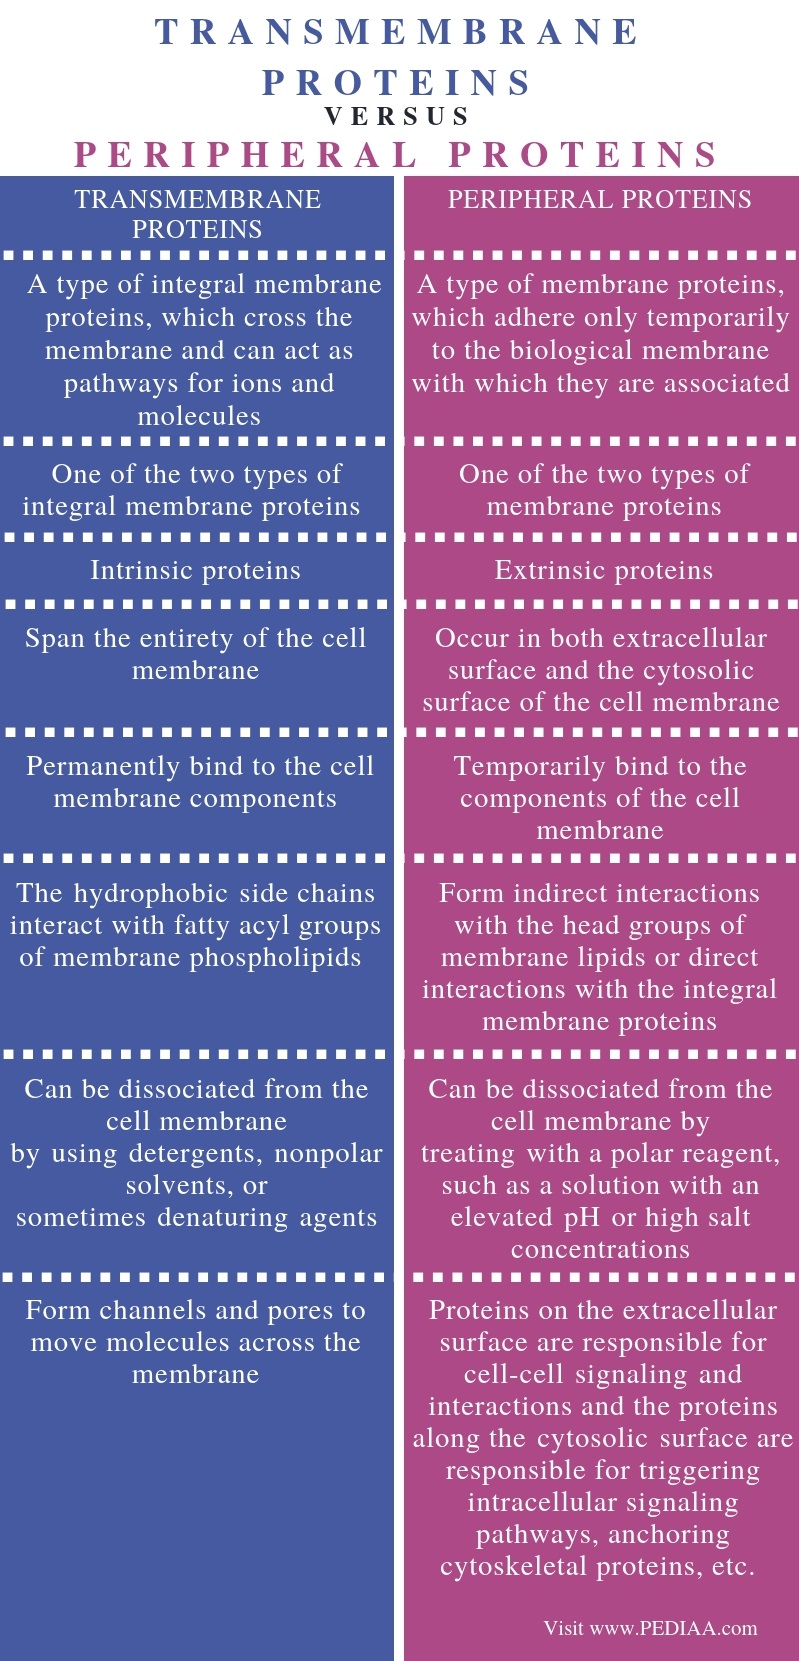 Difference Between Transmembrane and Peripheral Proteins - Comparison Summary